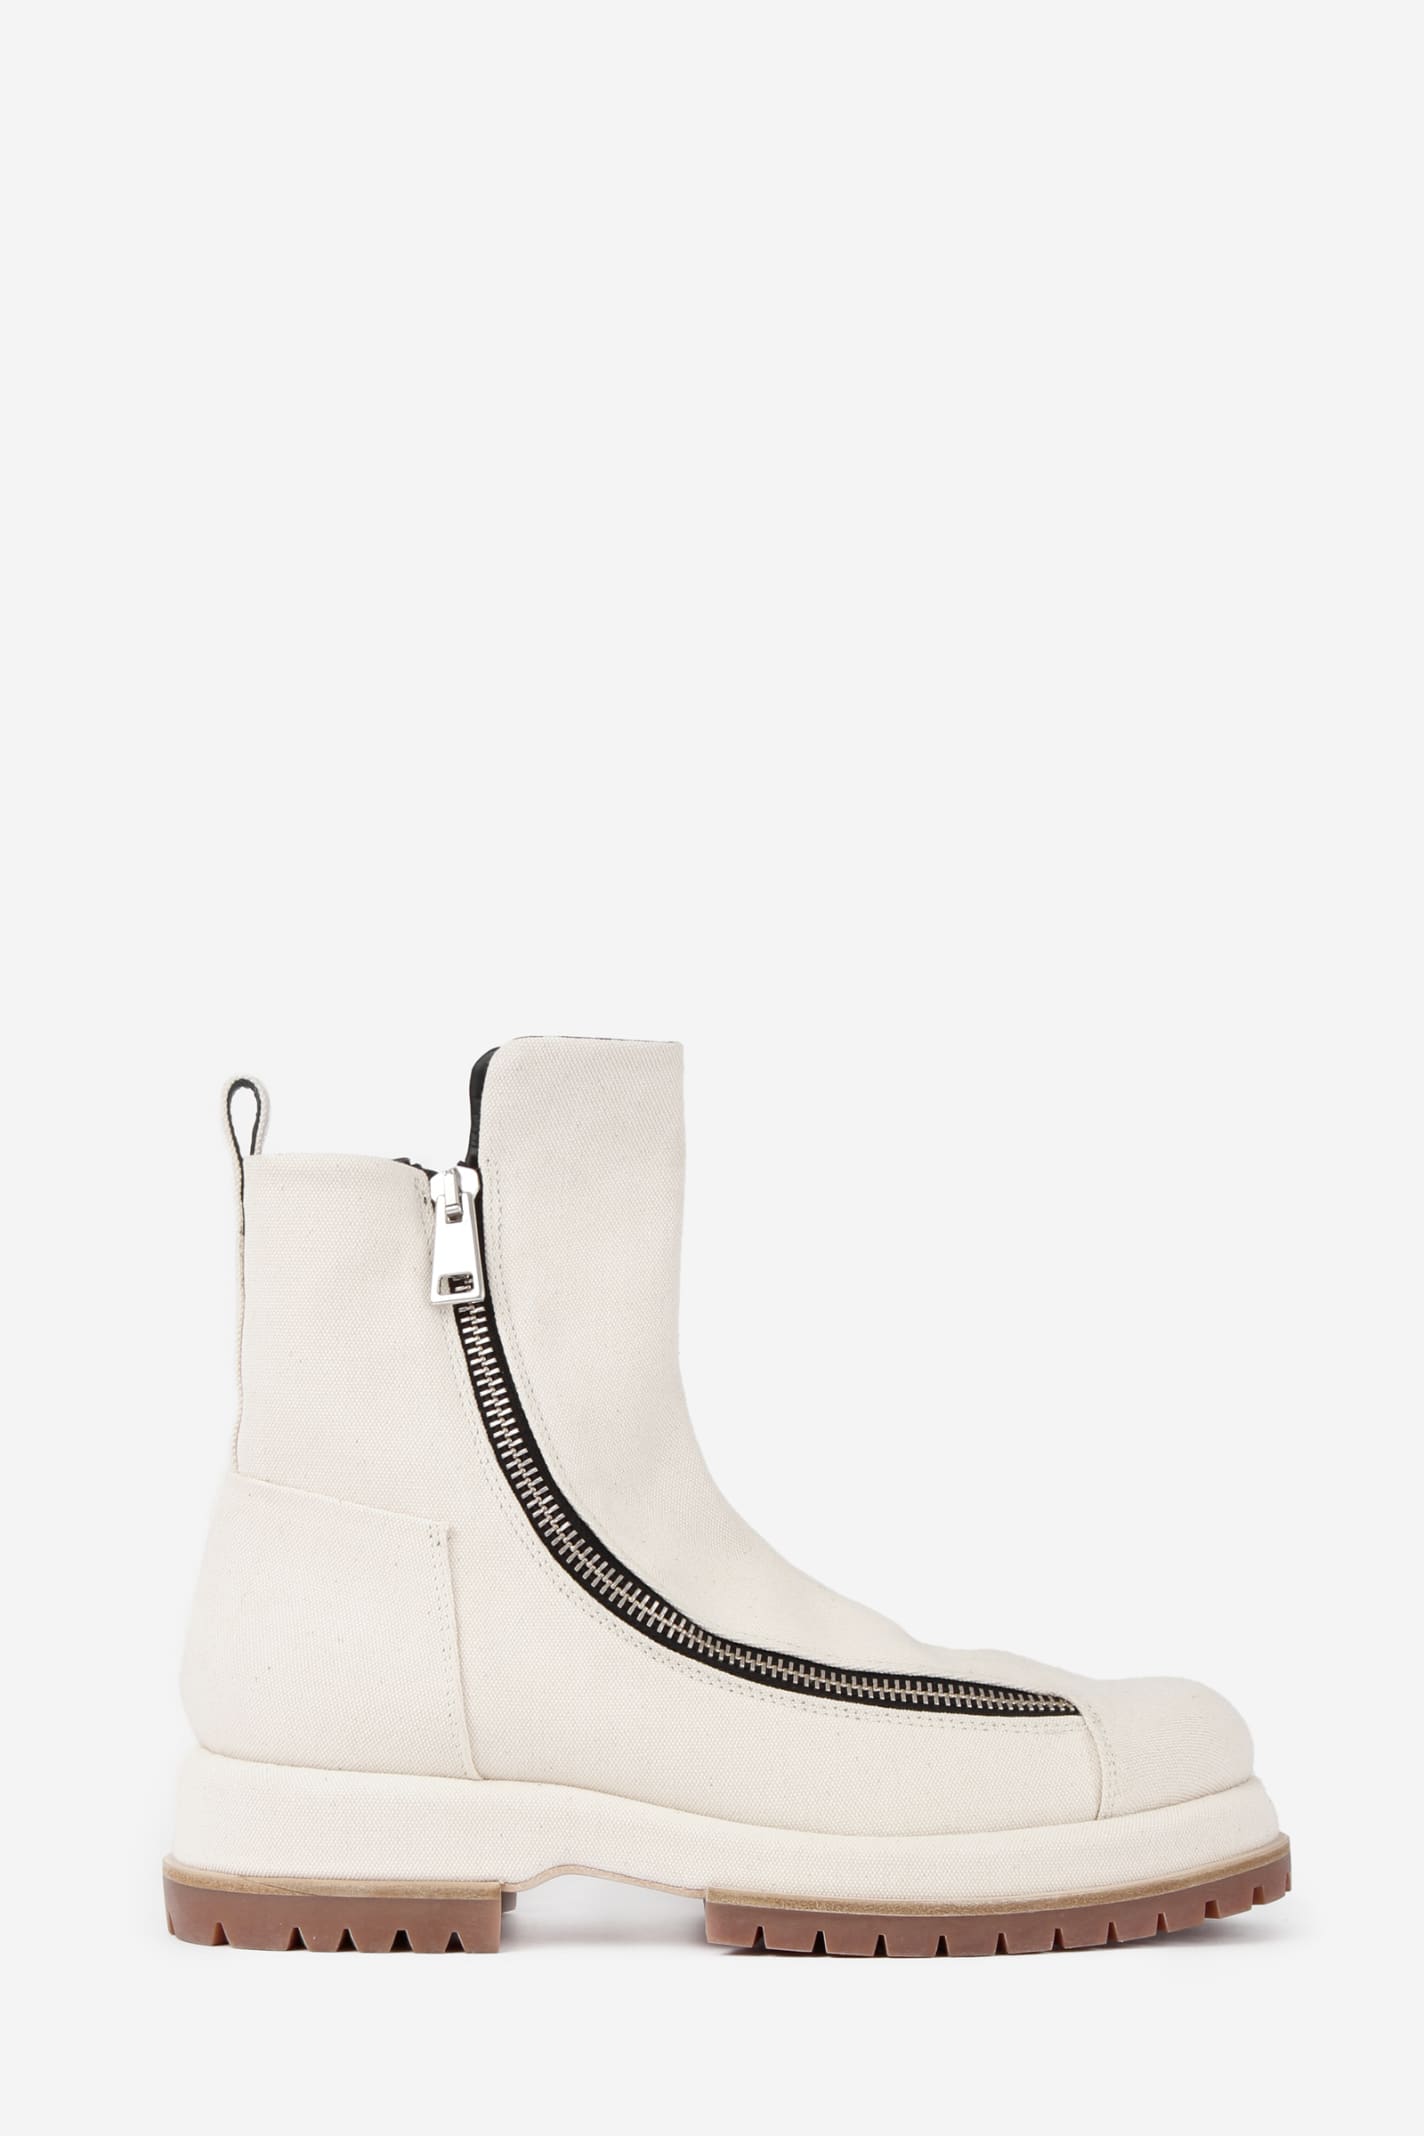 FourTwoFour on Fairfax Boots